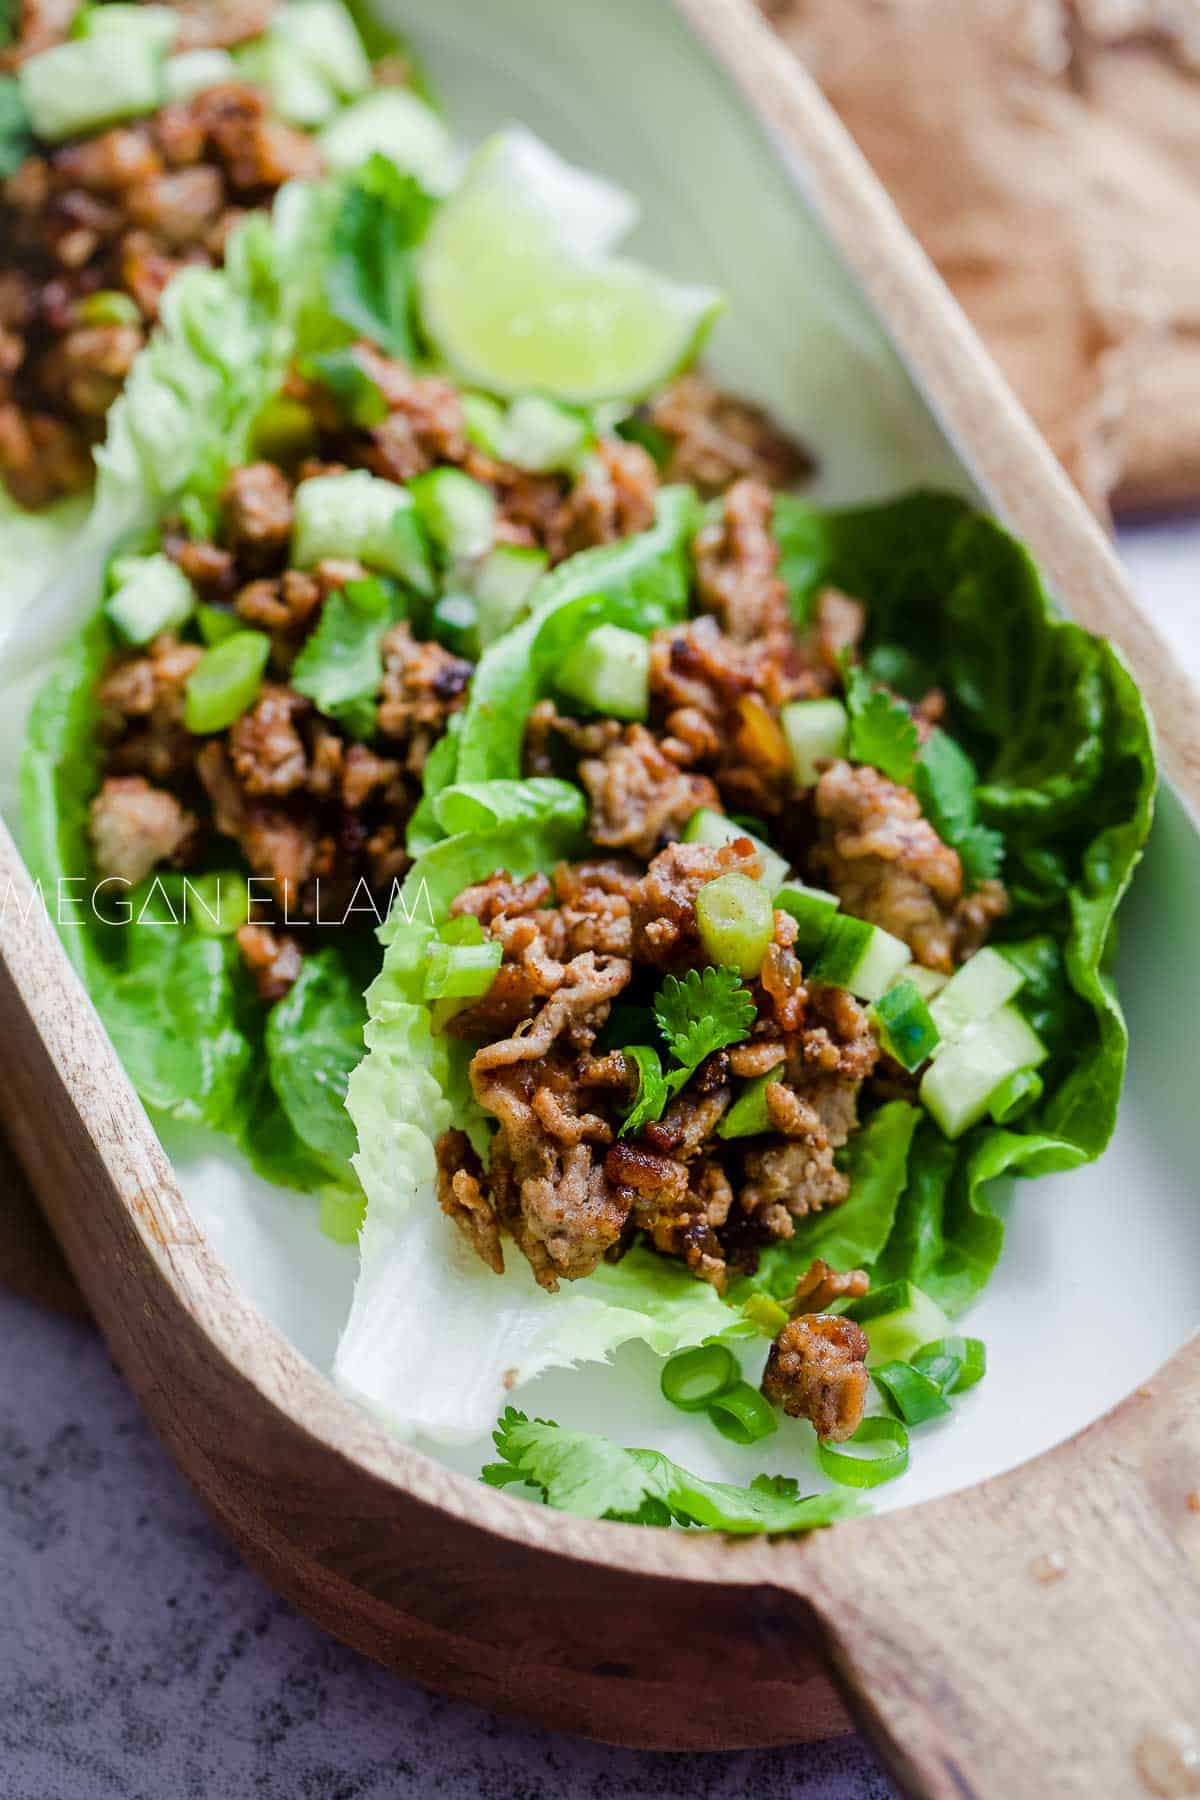 San Choy Bow in romaine lettuce cups in a white bowl.